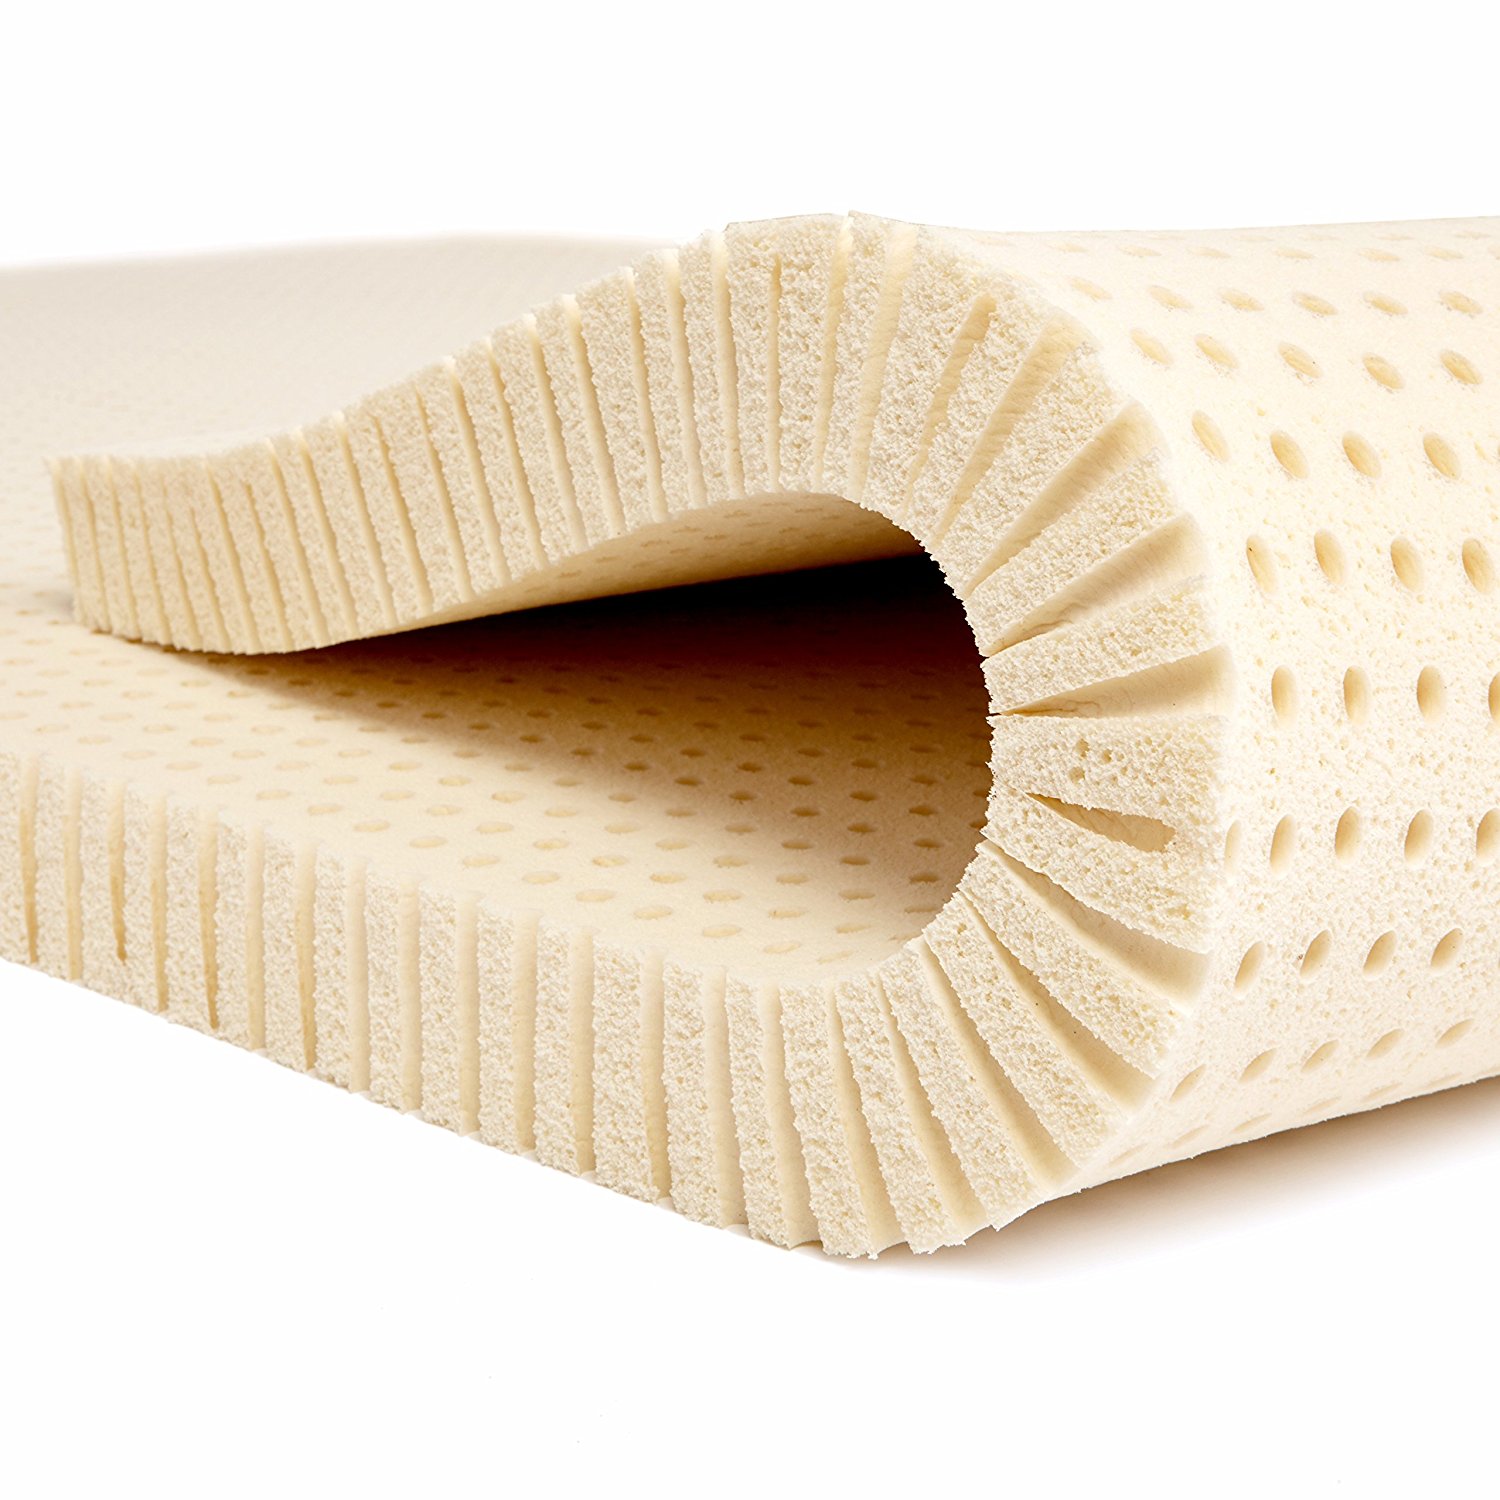 Discovering natural latex foam as the more durable and comfortable material